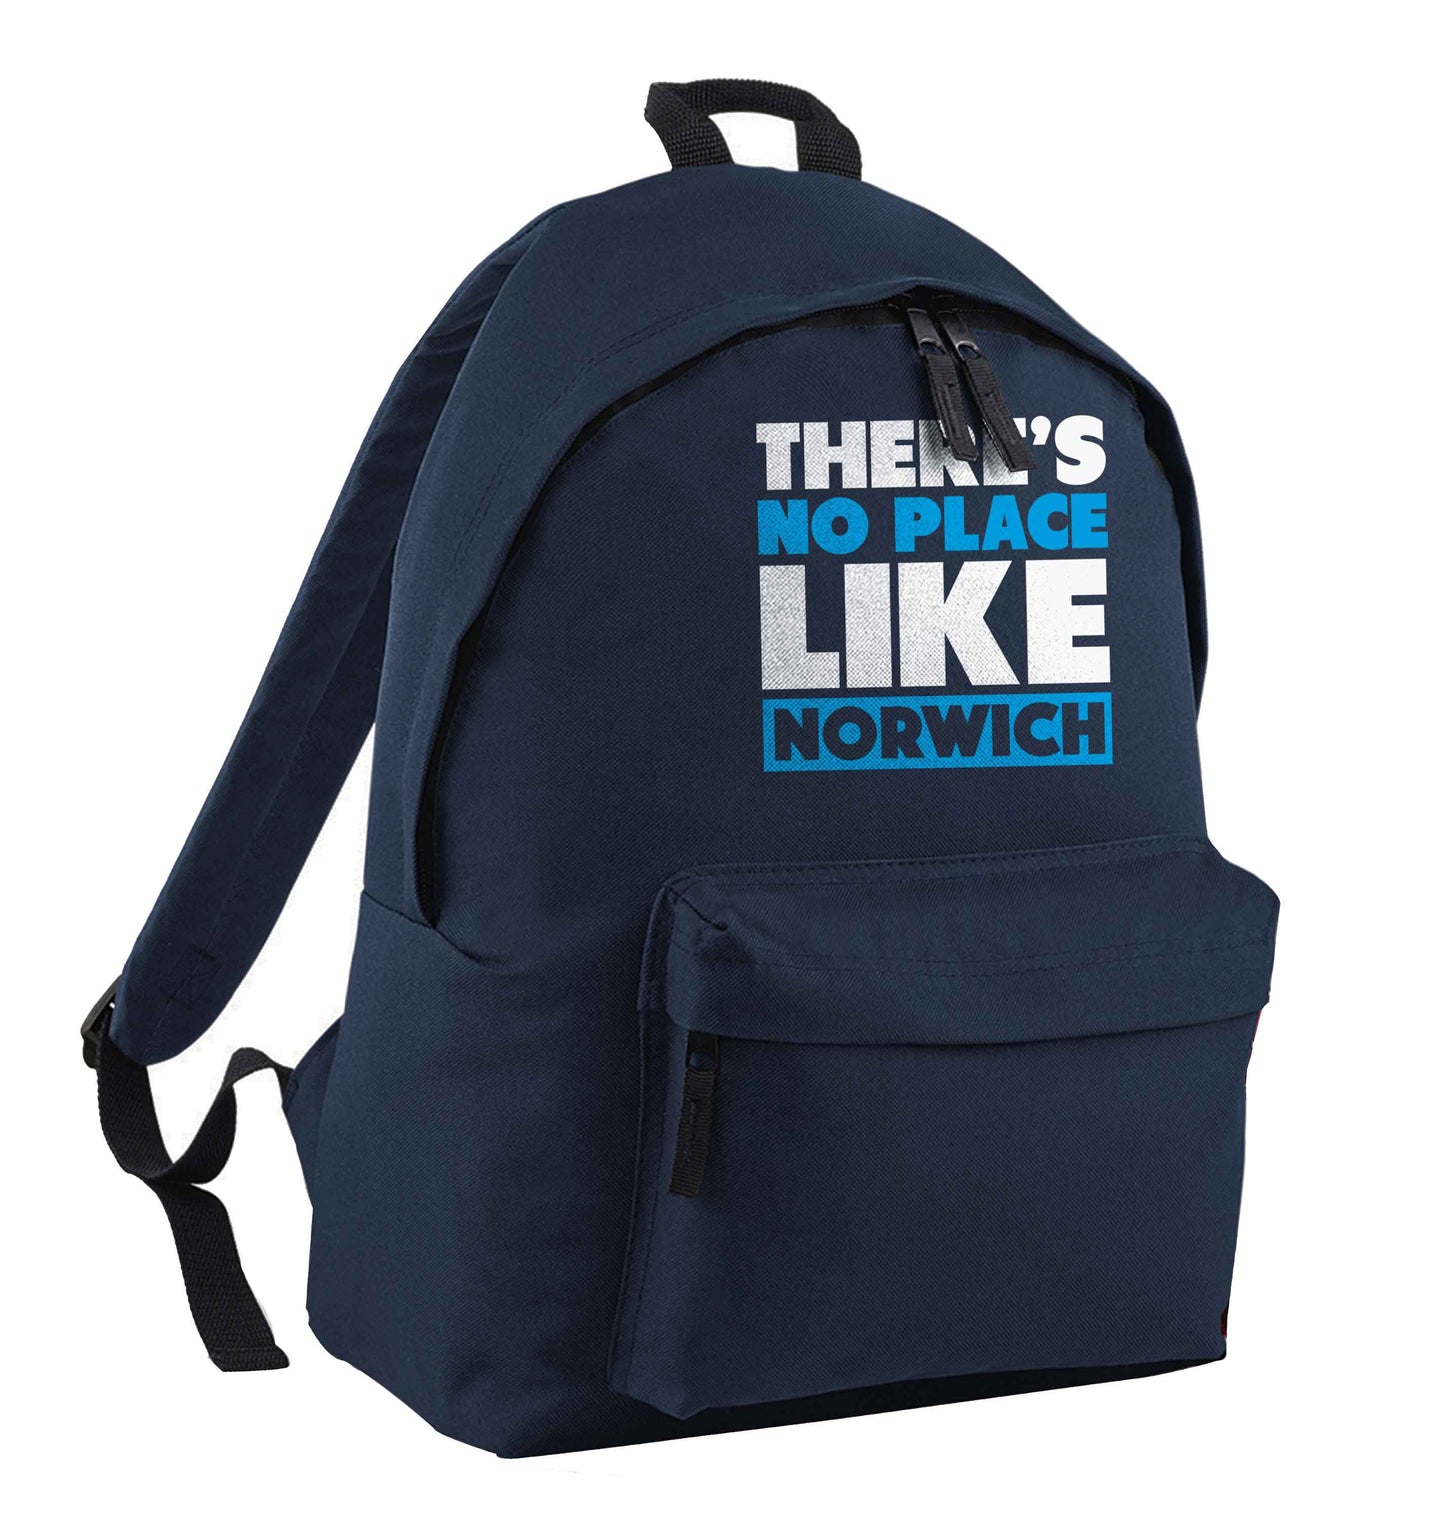 There's no place like Norwich navy adults backpack